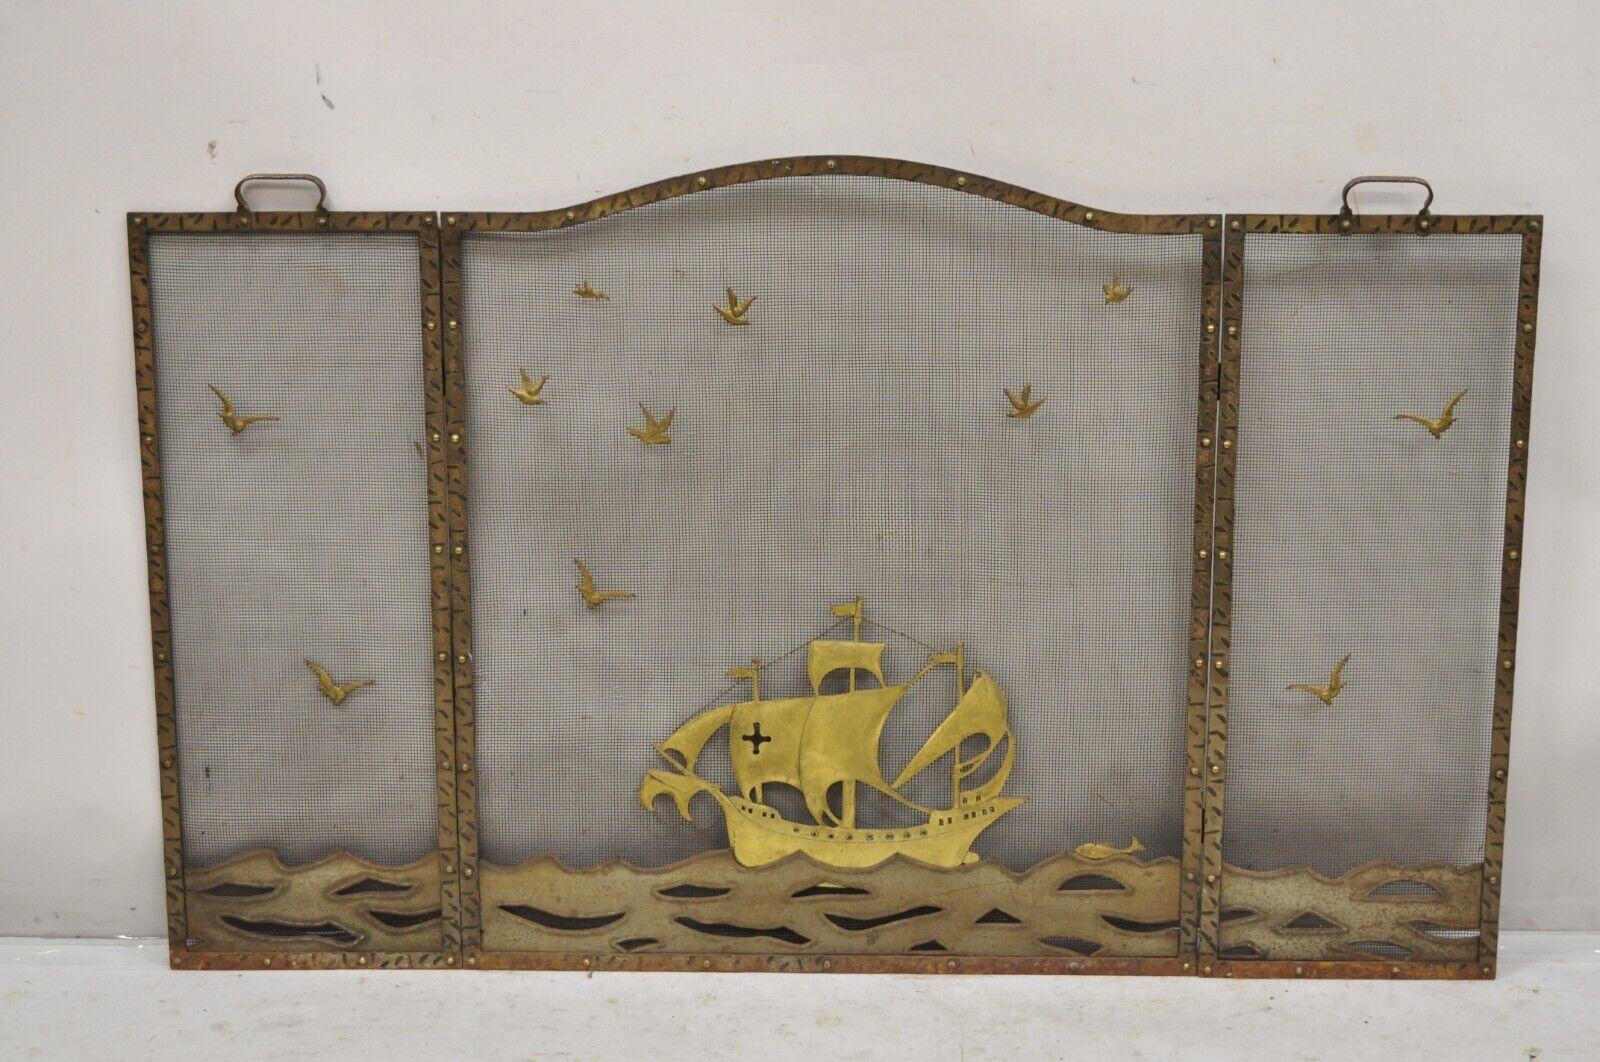 Vintage Nautical Clipper Ship Boat Metal Folding Fireplace Screen, Firescreen. Mid to Late 20th Century. Measurements: 33.5